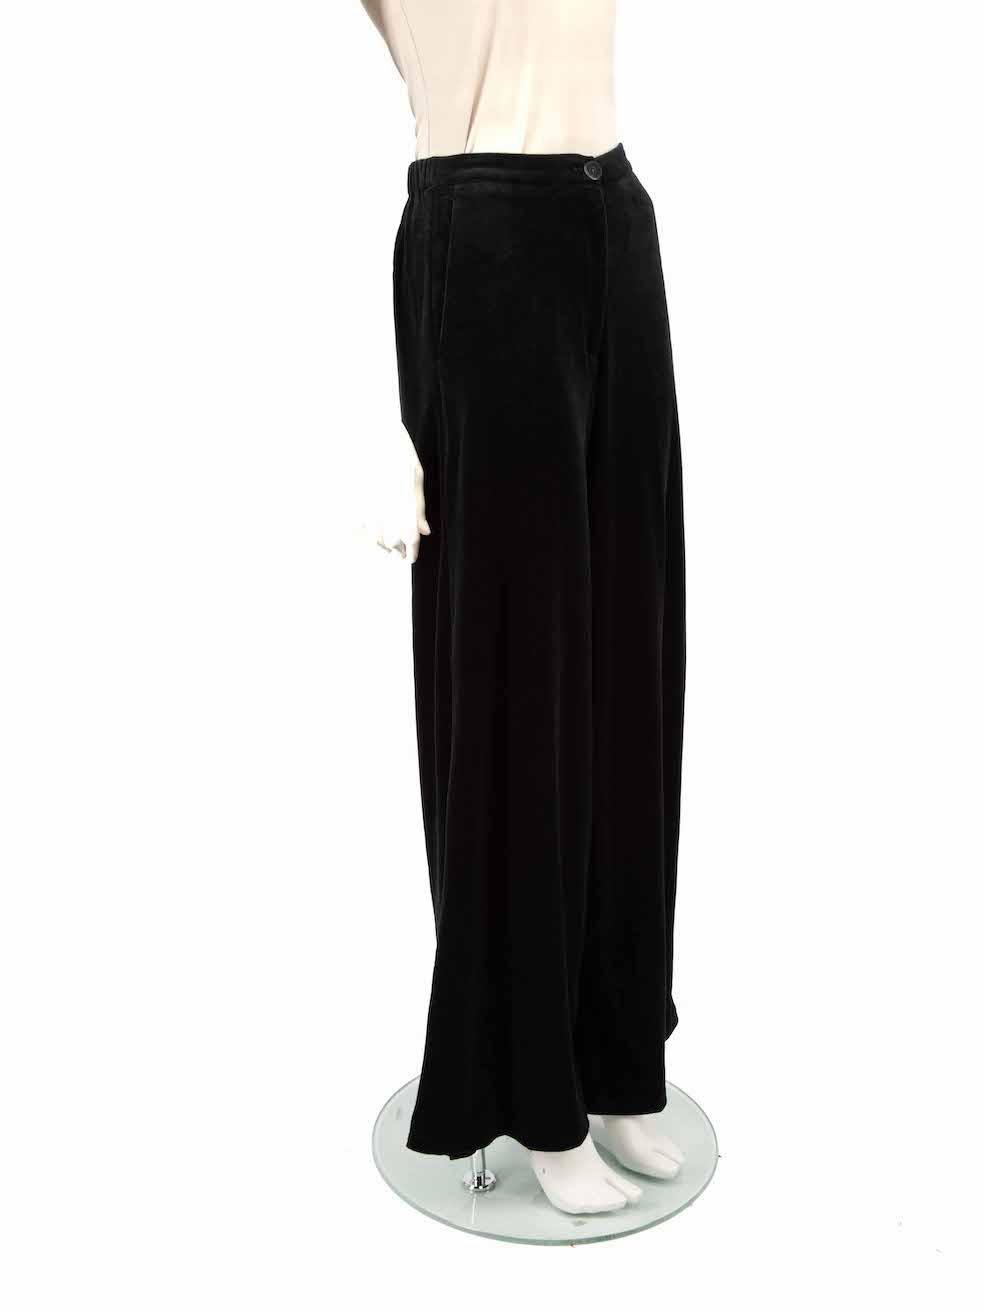 CONDITION is Very good. Hardly any visible wear to trousers is evident on this used Forte Forte designer resale item.
 
 
 
 Details
 
 
 Black
 
 Velvet
 
 Wide leg trousers
 
 High rise
 
 Front zip closure with button
 
 2x Front side pockets
 
